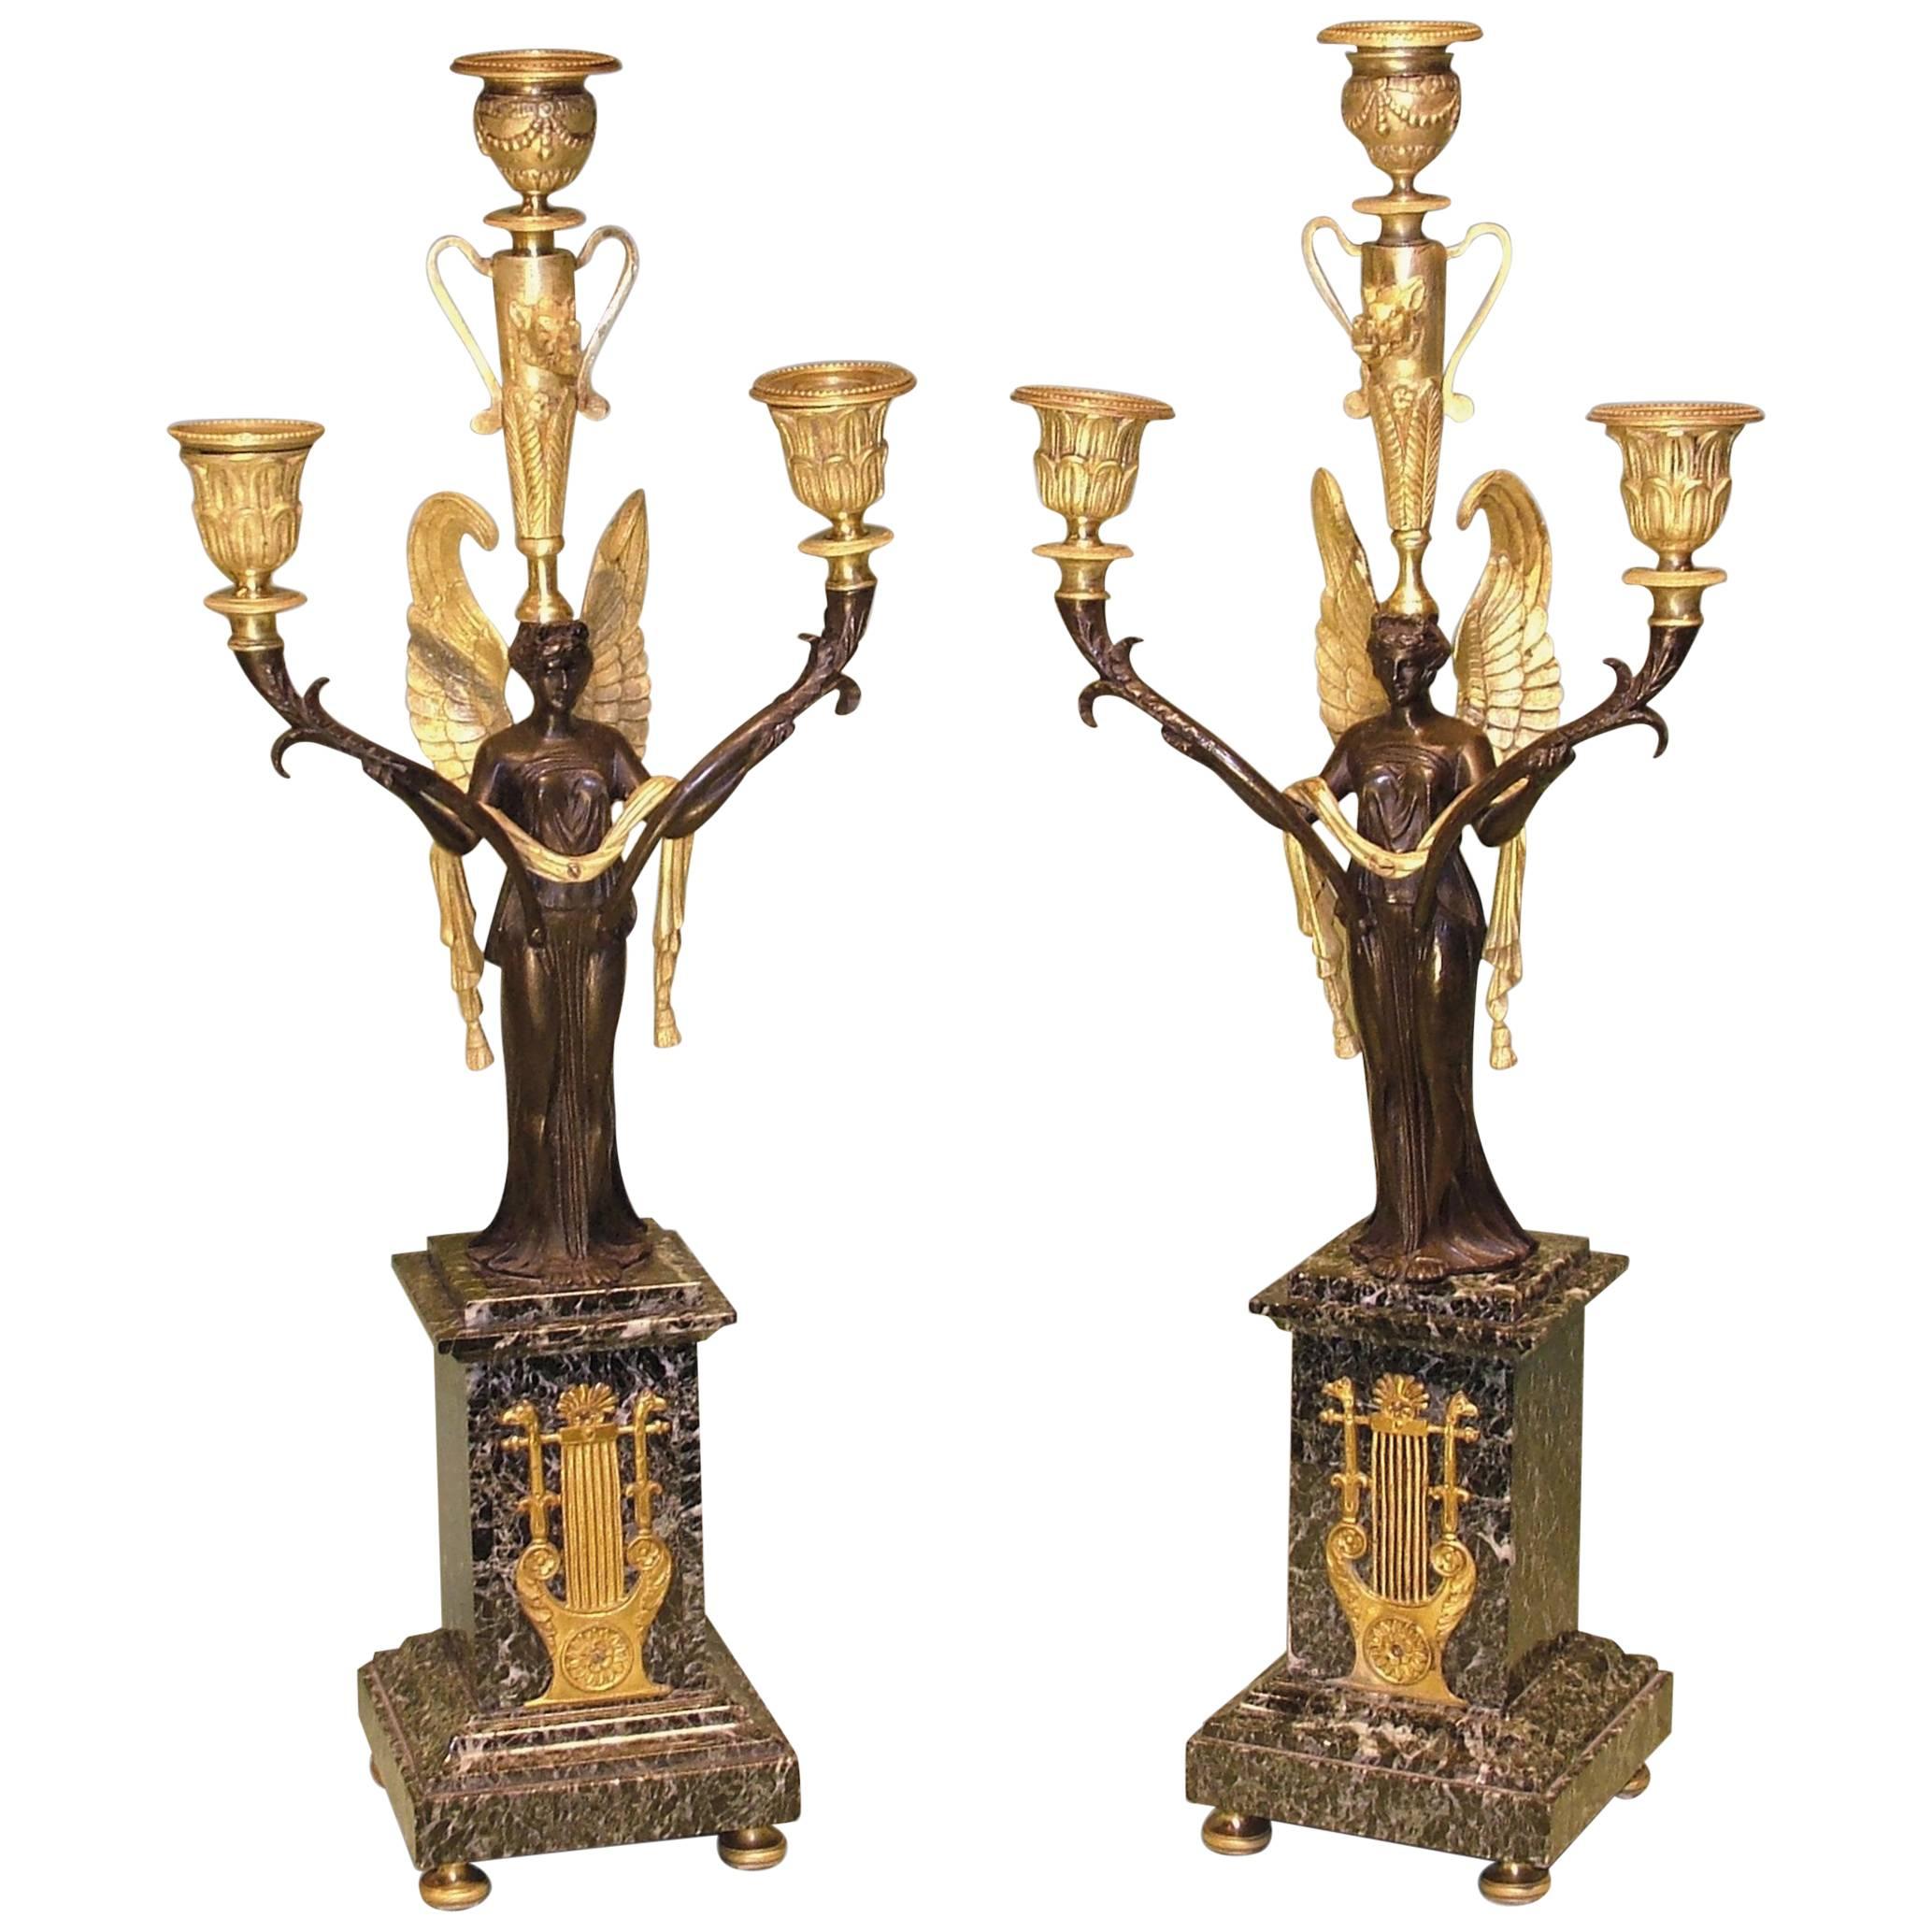 Pair of Ormolu and Green Marble Candelabra